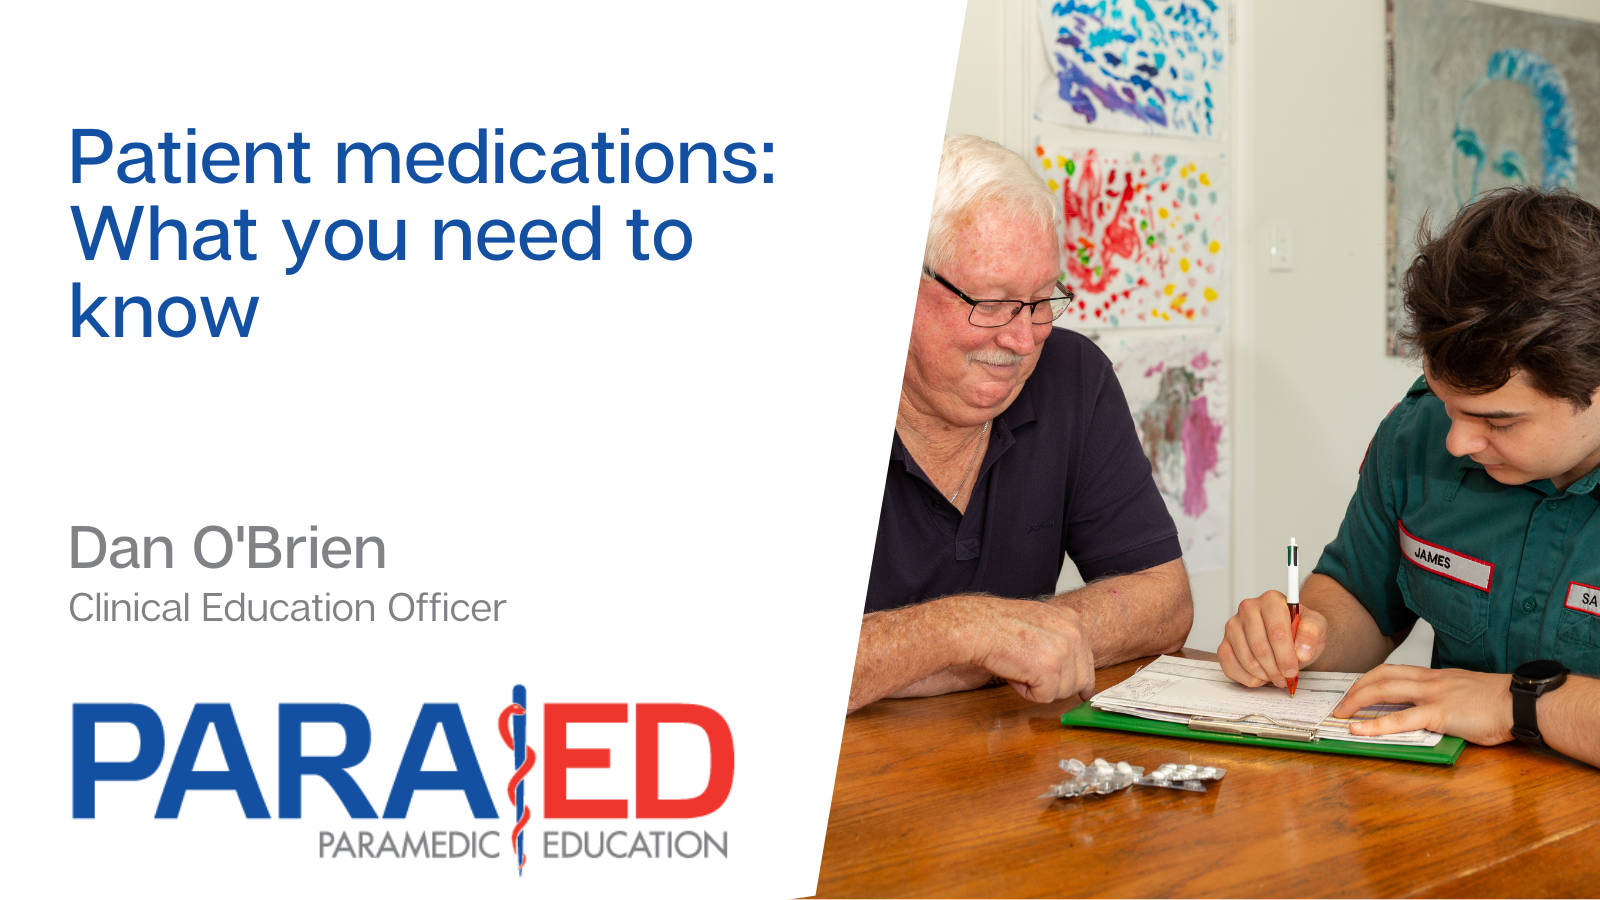 Patient medications: What you need to know